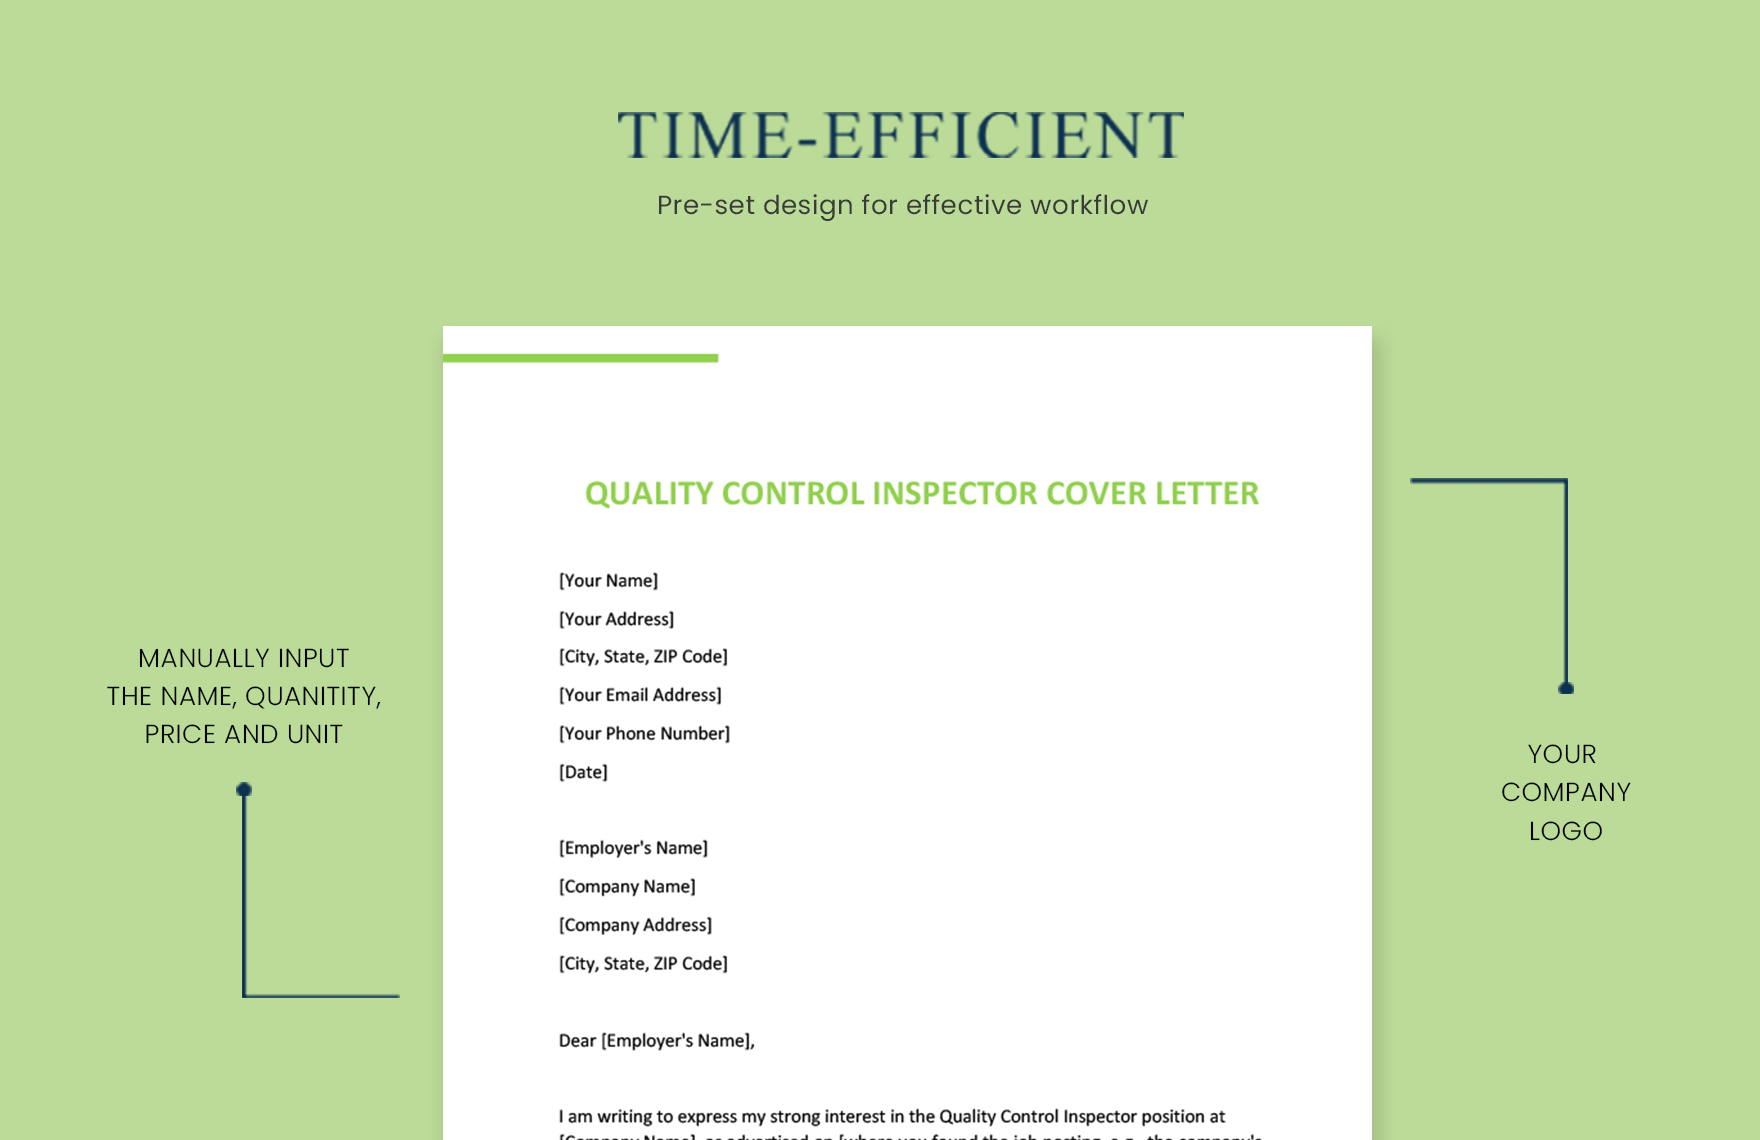 Quality Control Inspector Cover Letter